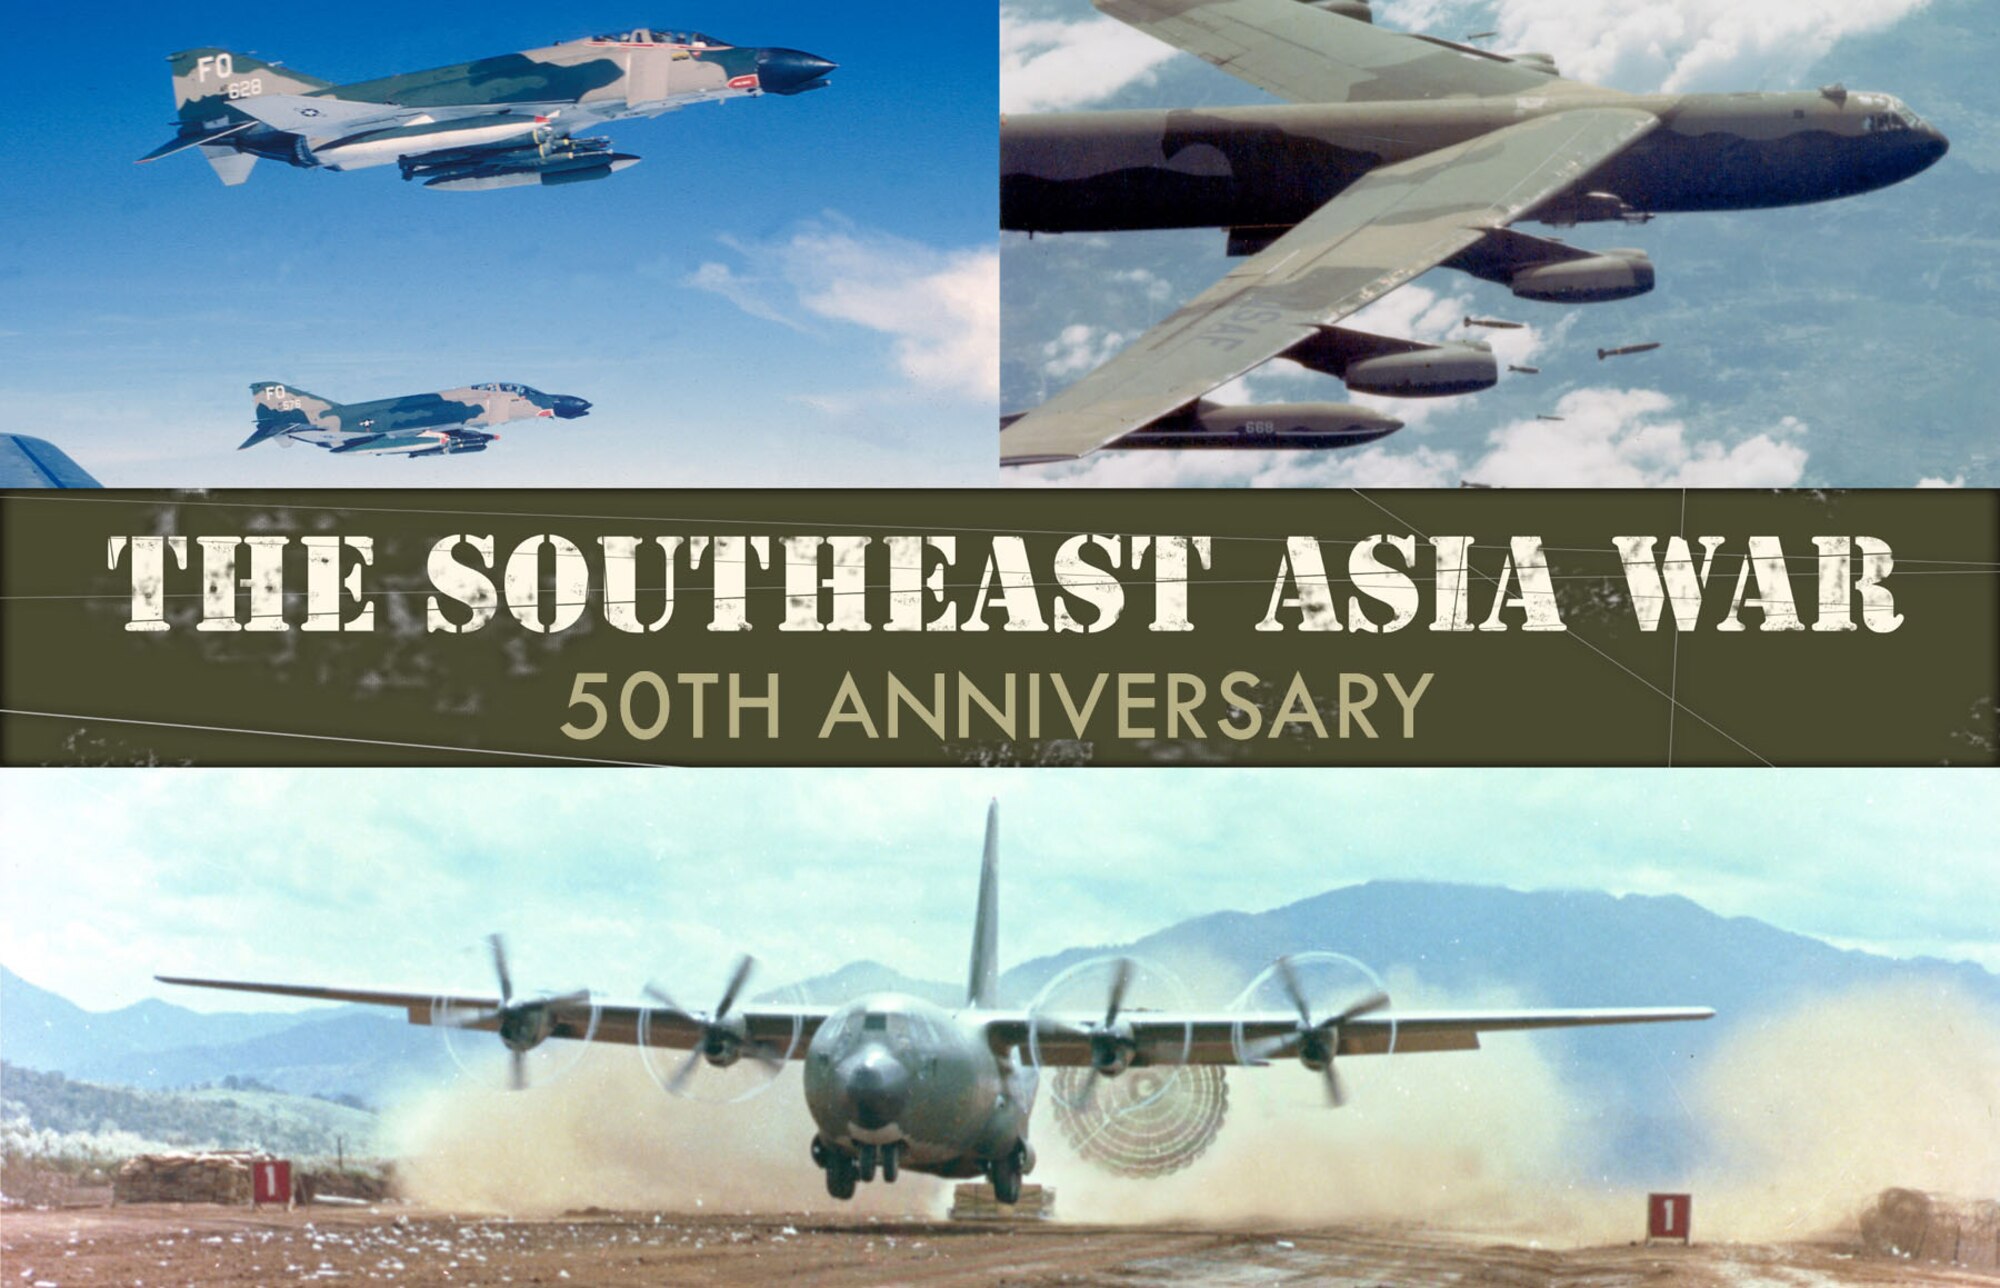 DAYTON, Ohio -- The National Museum of the U.S. Air Force will begin commemorating the 50th anniversary of the Southeast Asia War in 2011.